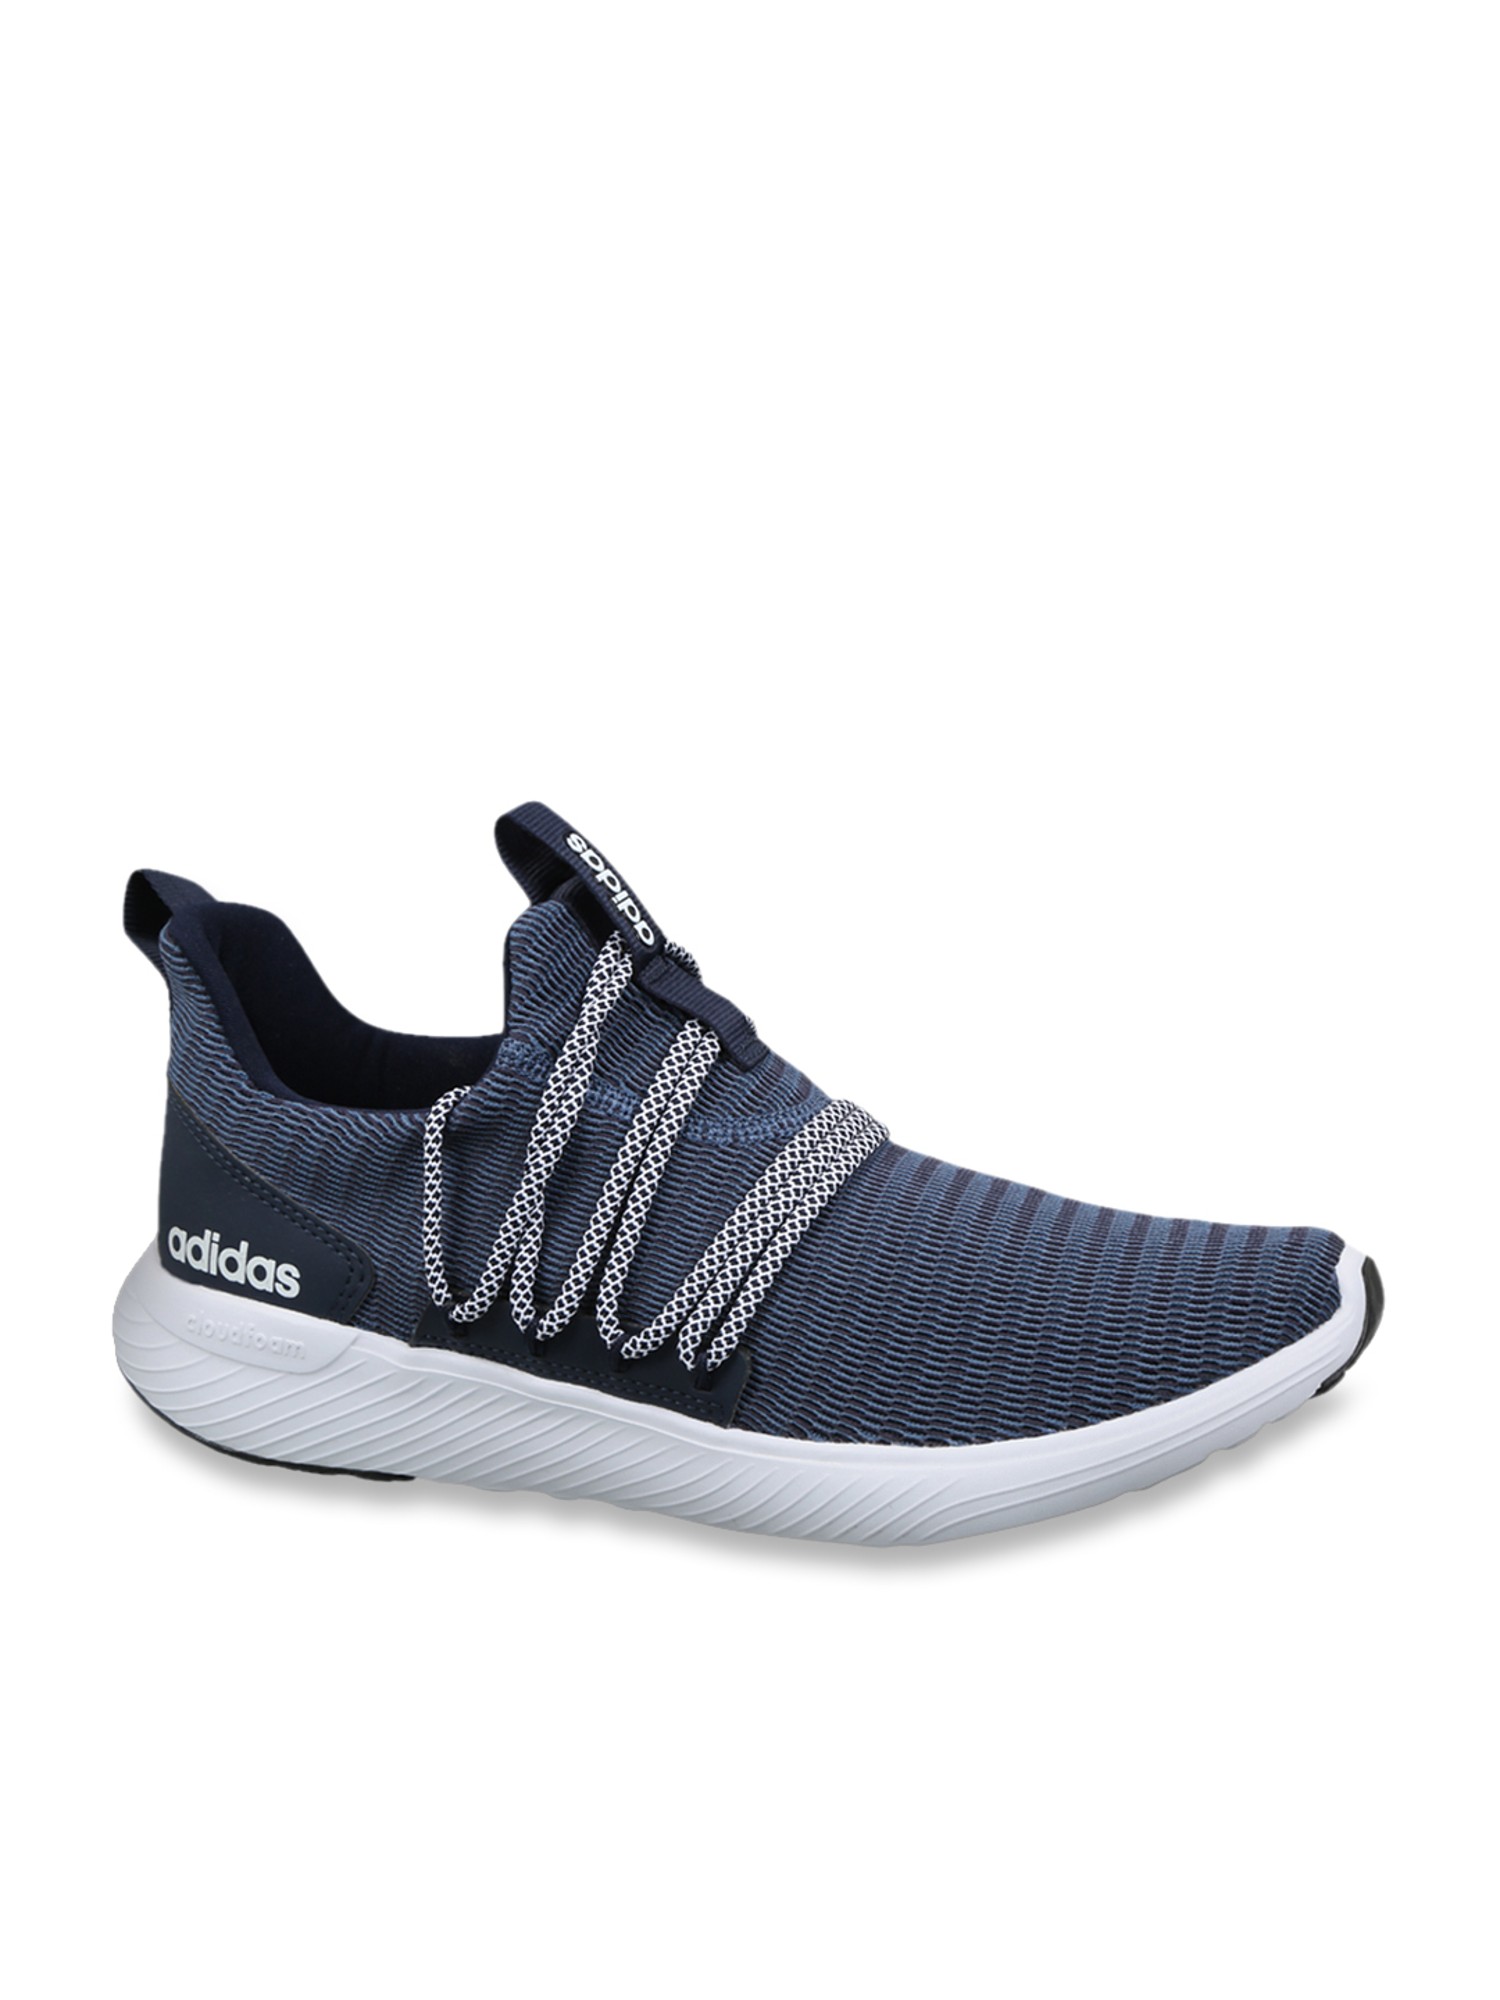 adidas navy shoes